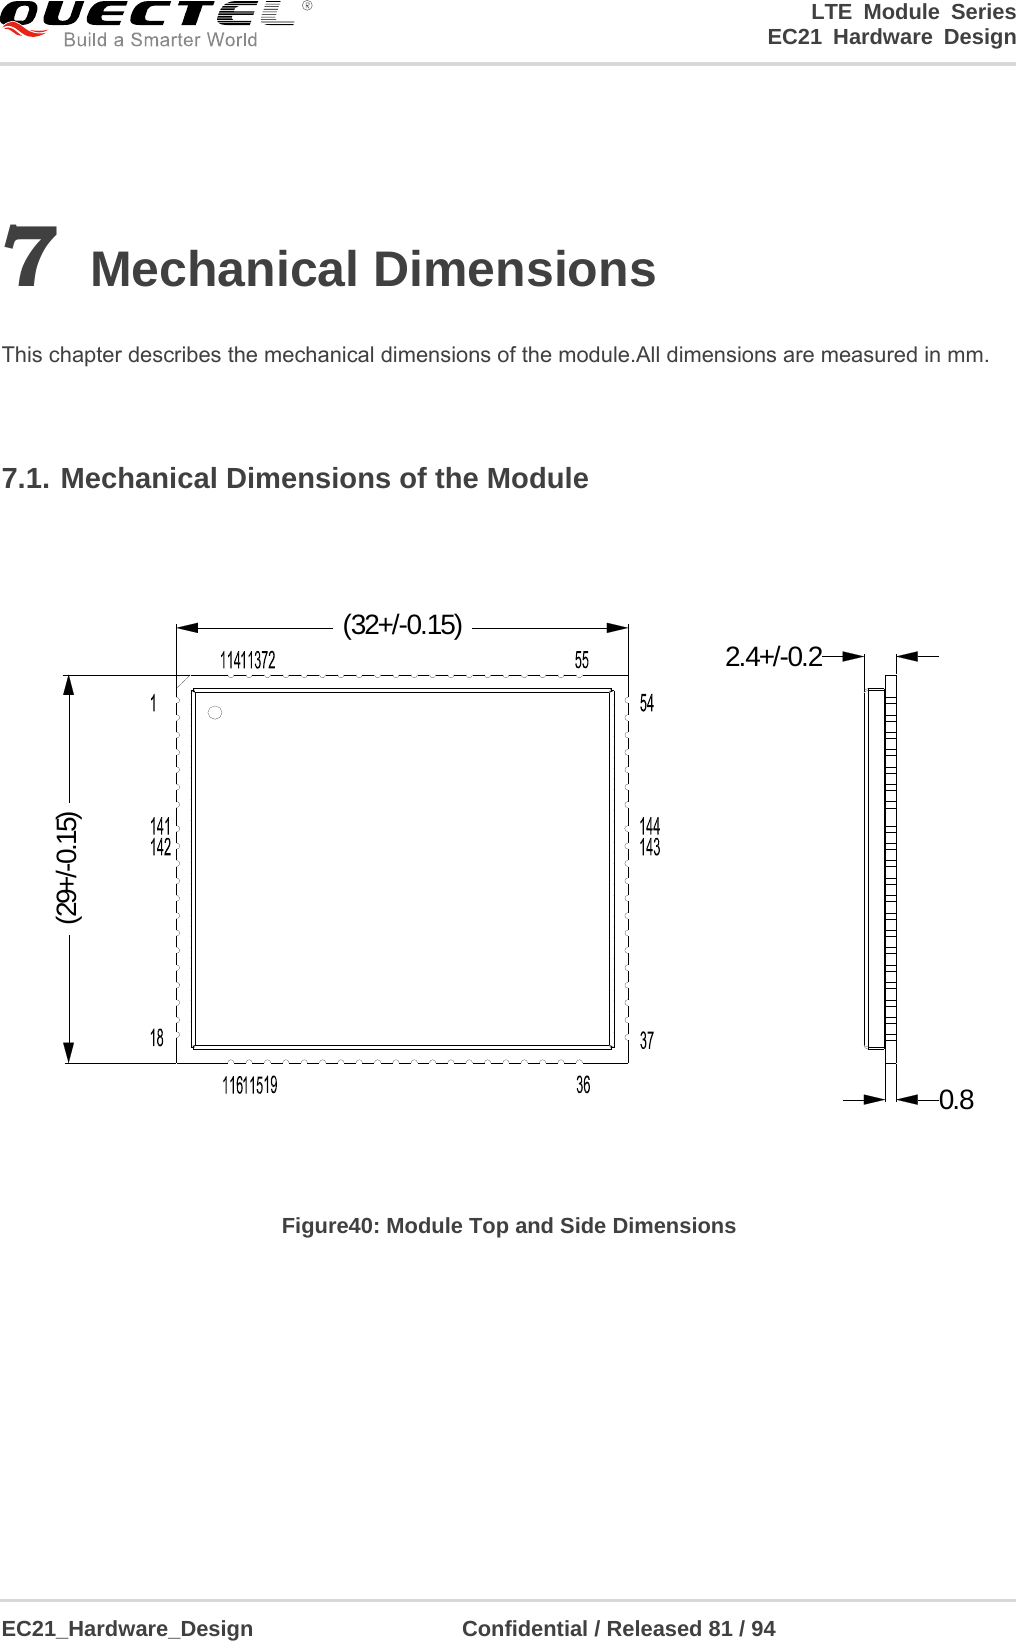 LTE Module Series                                                                 EC21 Hardware Design  EC21_Hardware_Design                   Confidential / Released 81 / 94    7 Mechanical Dimensions  This chapter describes the mechanical dimensions of the module.All dimensions are measured in mm.  7.1. Mechanical Dimensions of the Module  (32+/-0.15)(29+/-0.15)0.82.4+/-0.2 Figure40: Module Top and Side Dimensions  